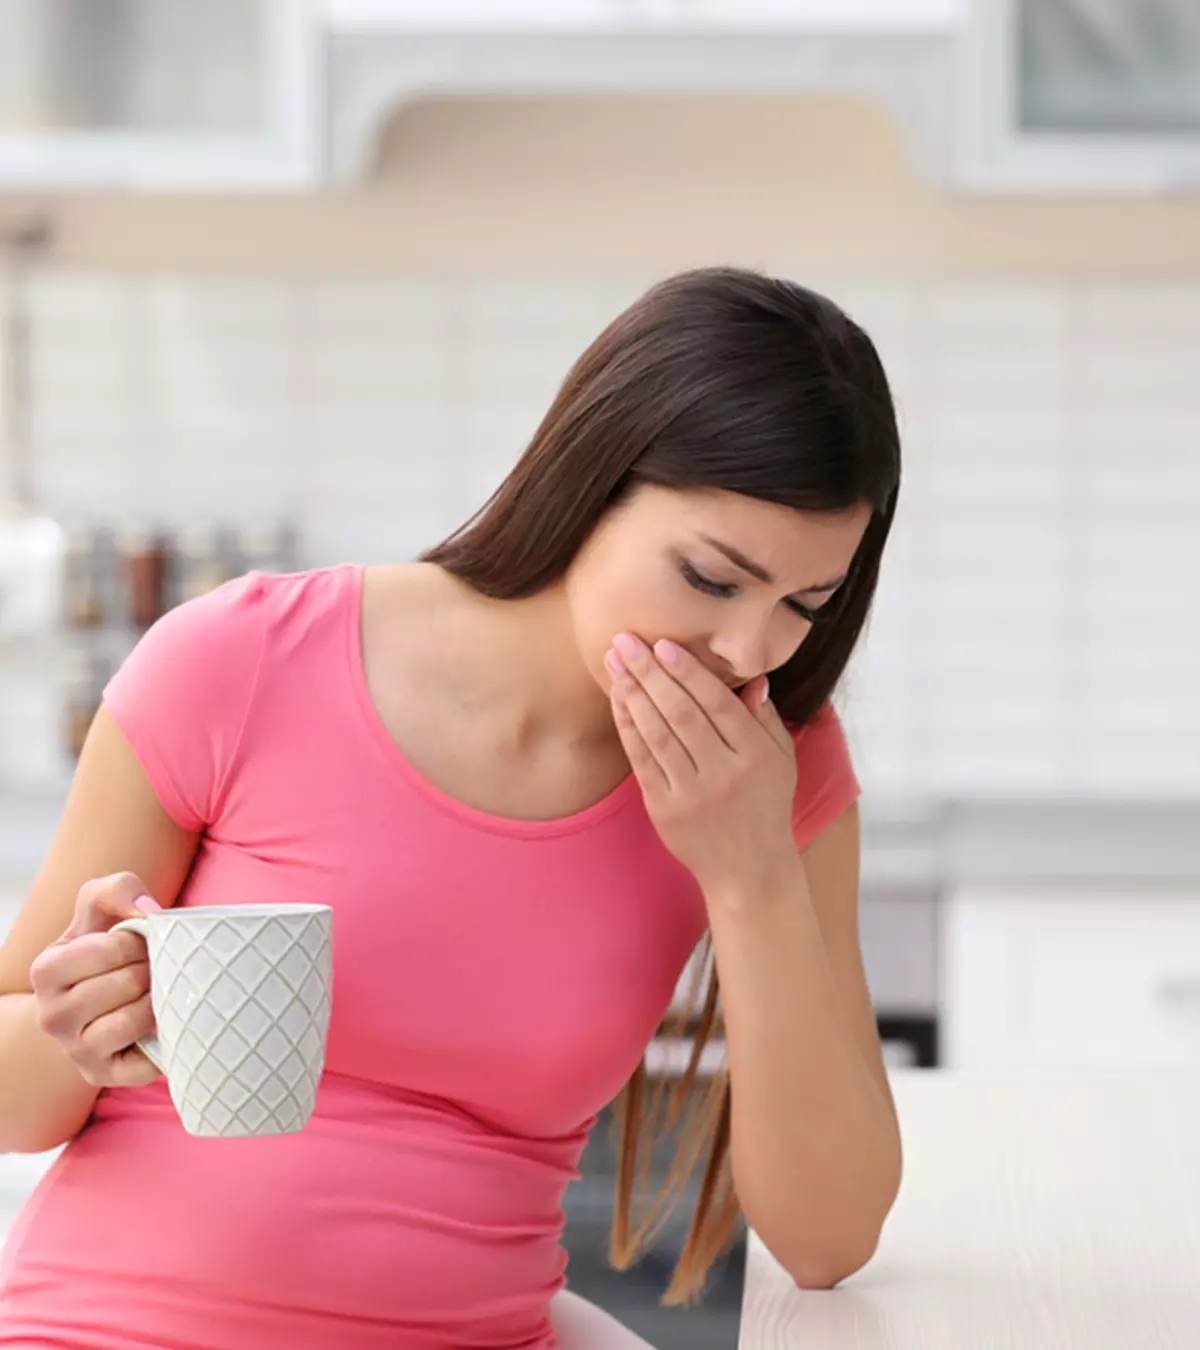 Pregnancy Symptoms And Discomforts Every Mom-To-Be Should Know About